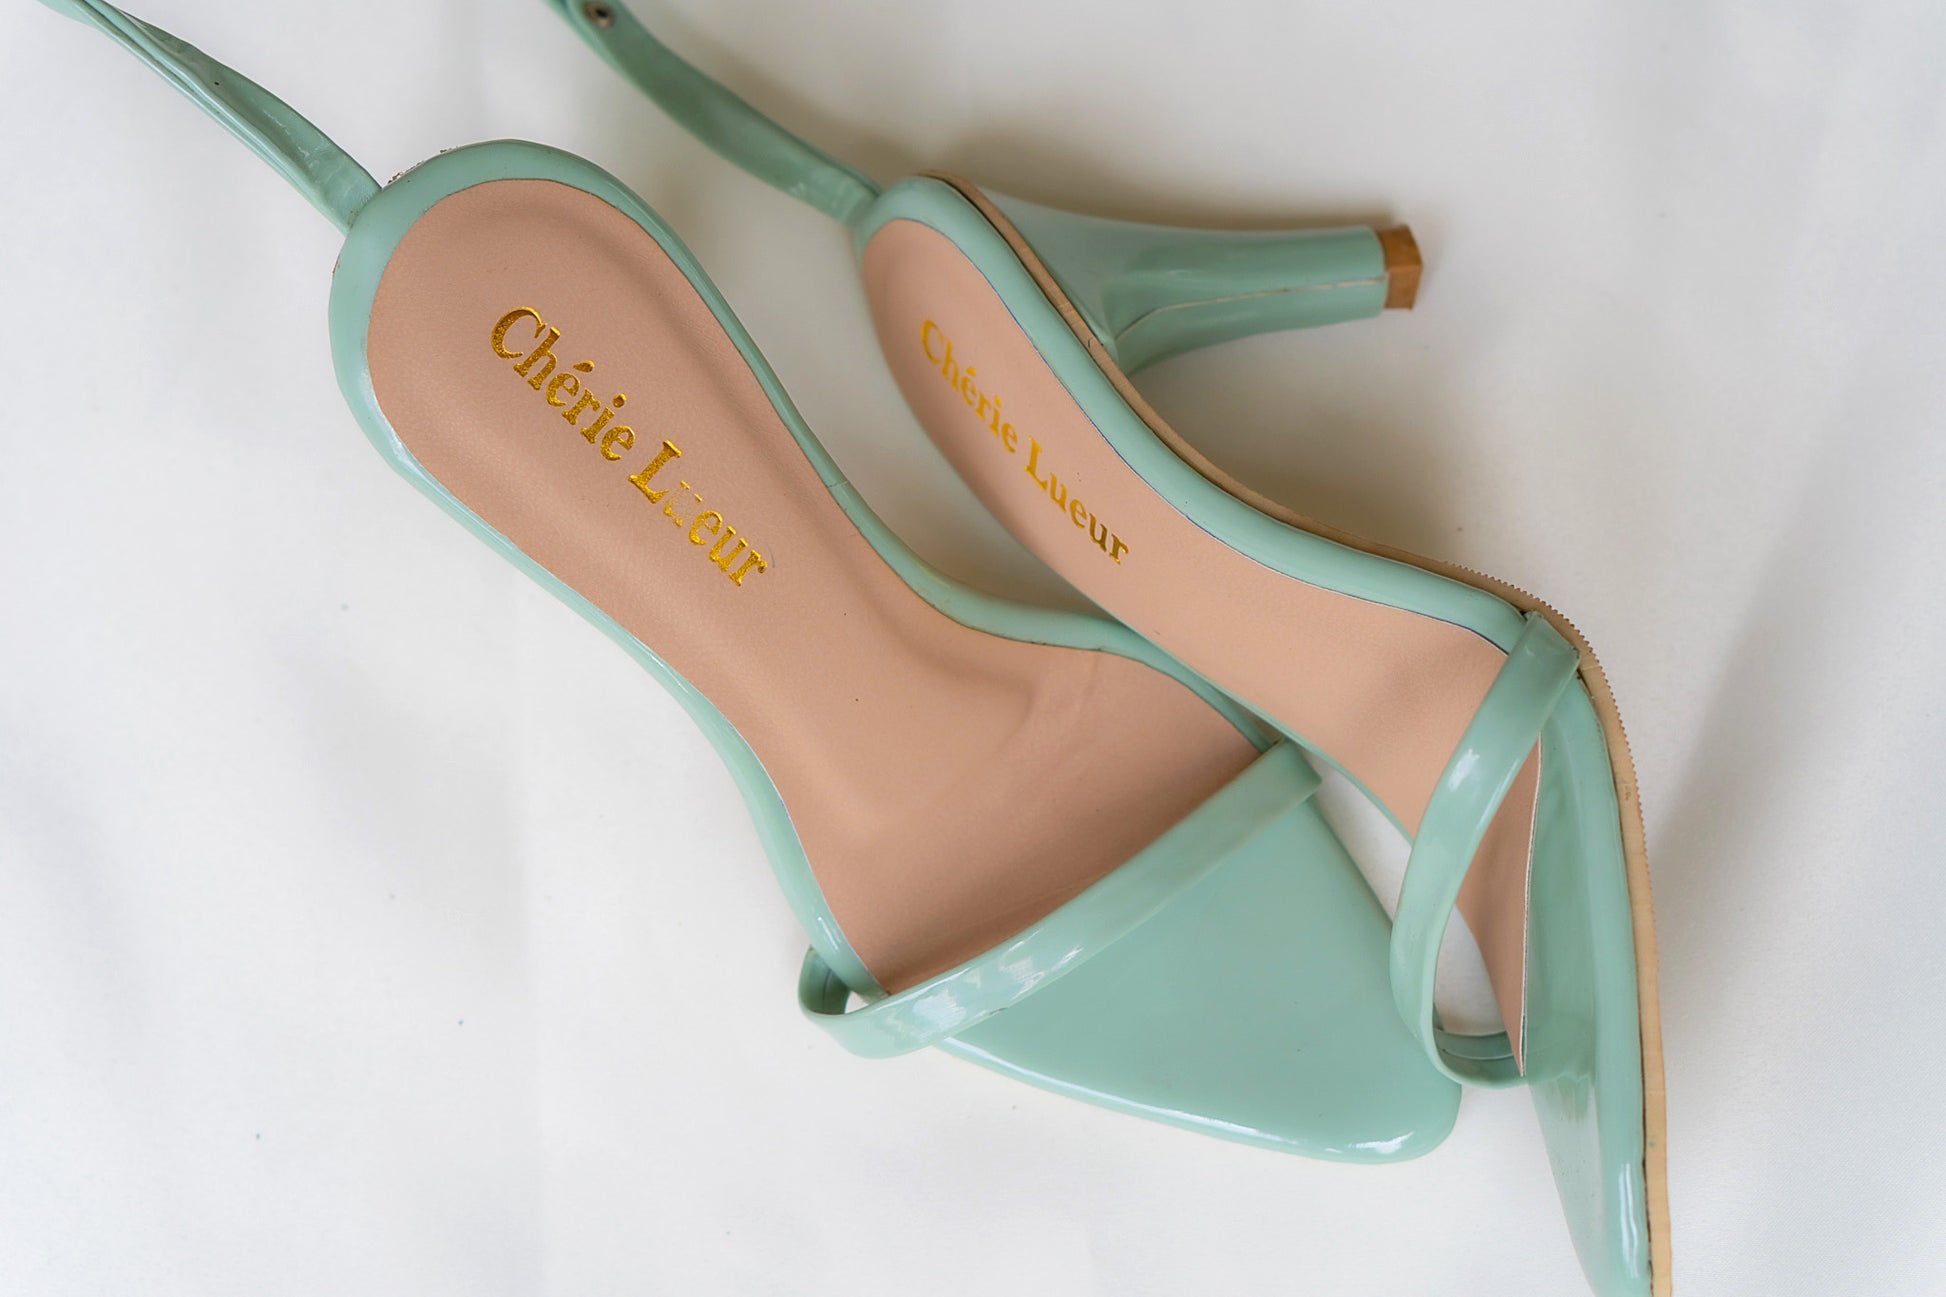 Charming mint green heel with a stylish 3-inch lift